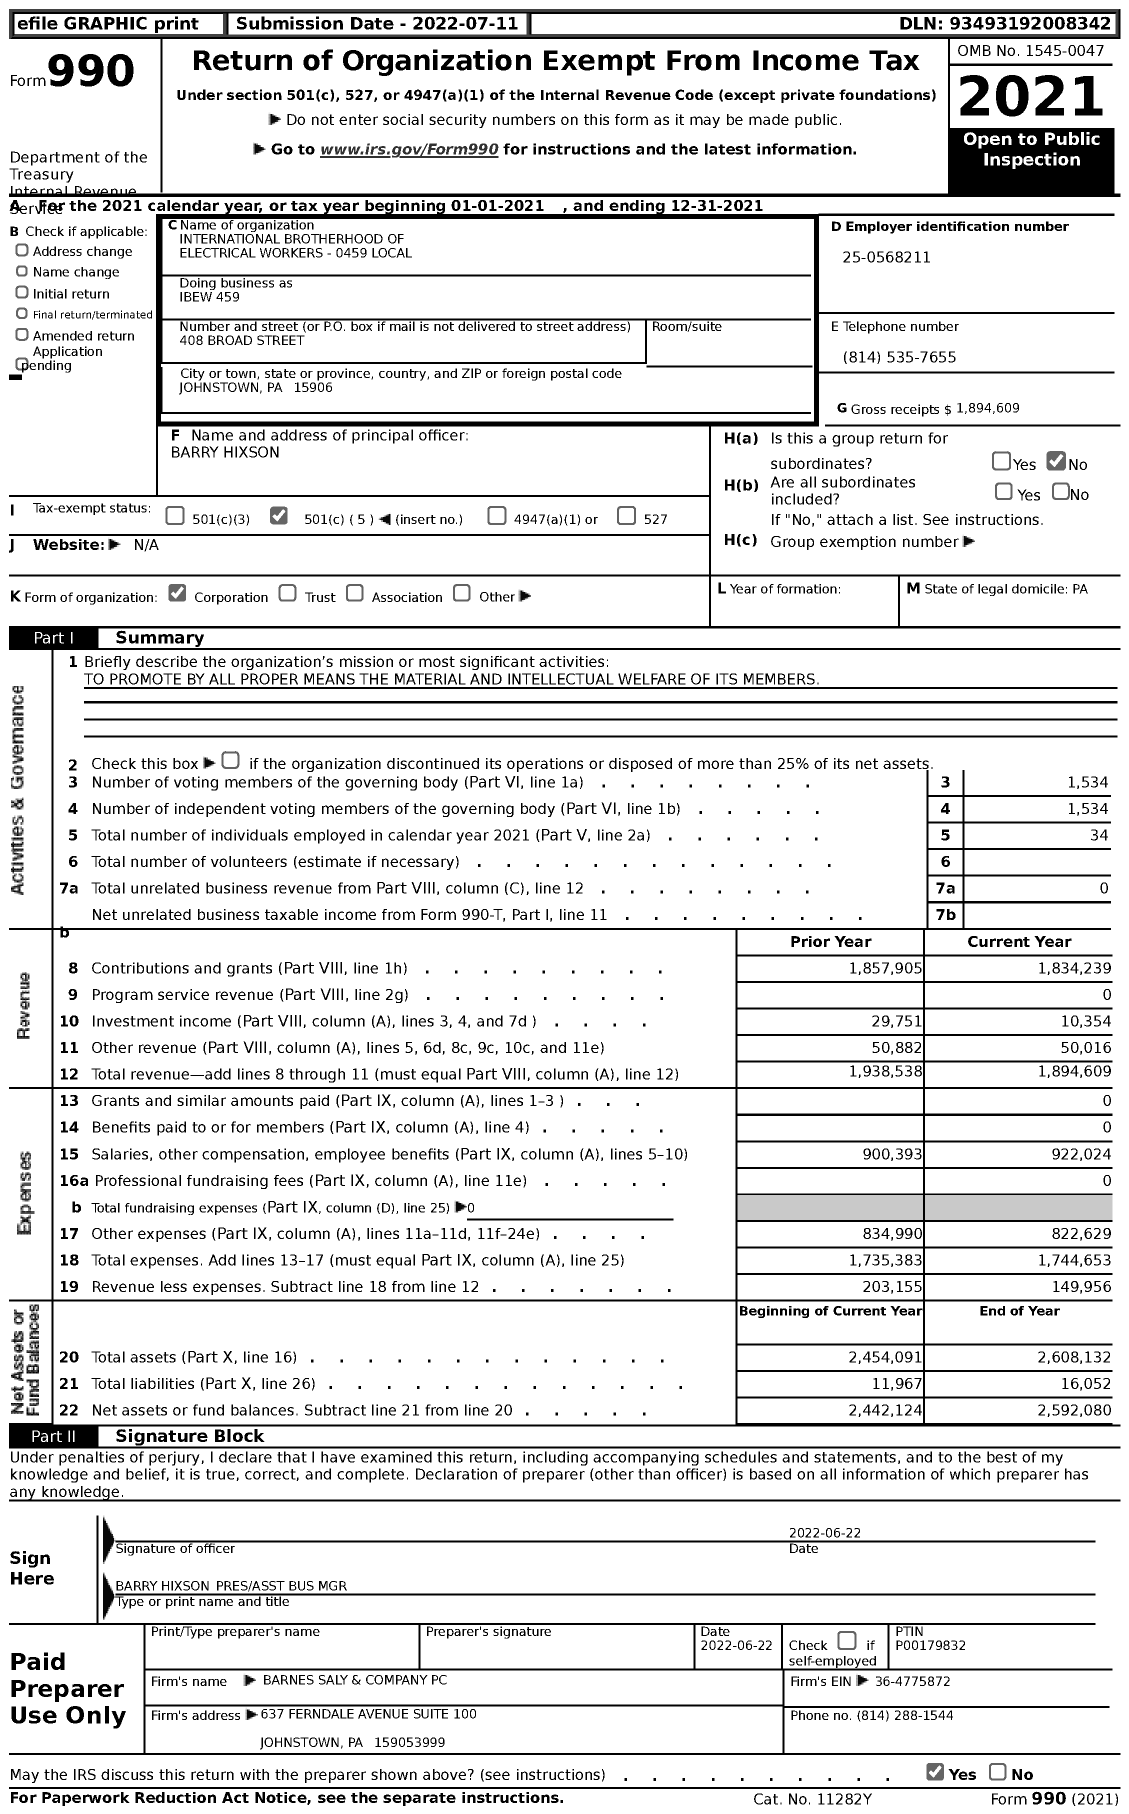 Image of first page of 2021 Form 990 for International Brotherhood of Electrical Workers - IBEW 459